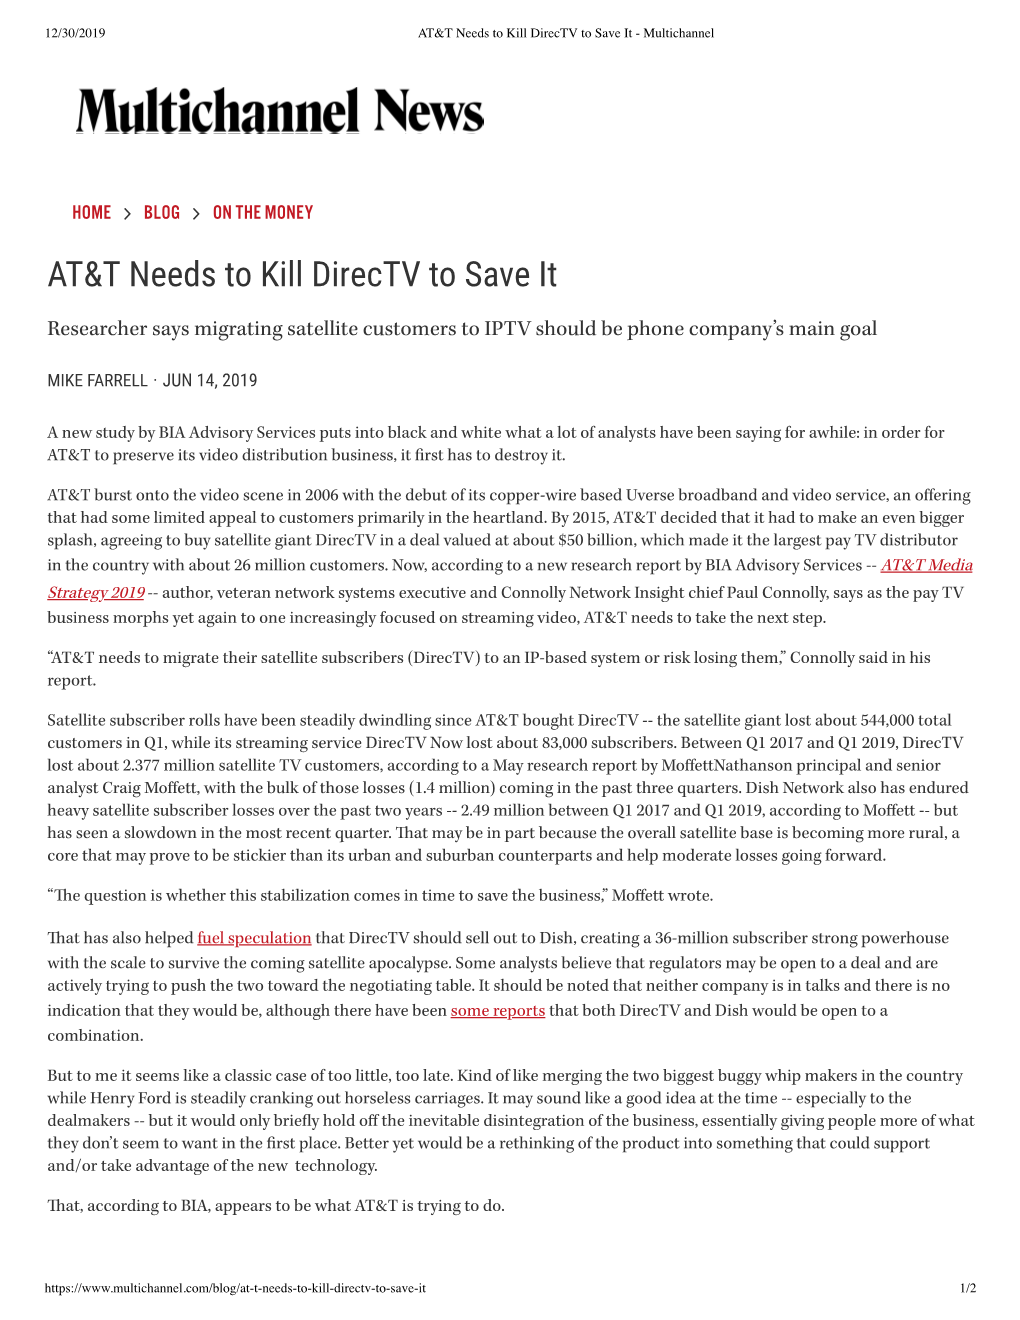 AT&T Needs to Kill Directv to Save It